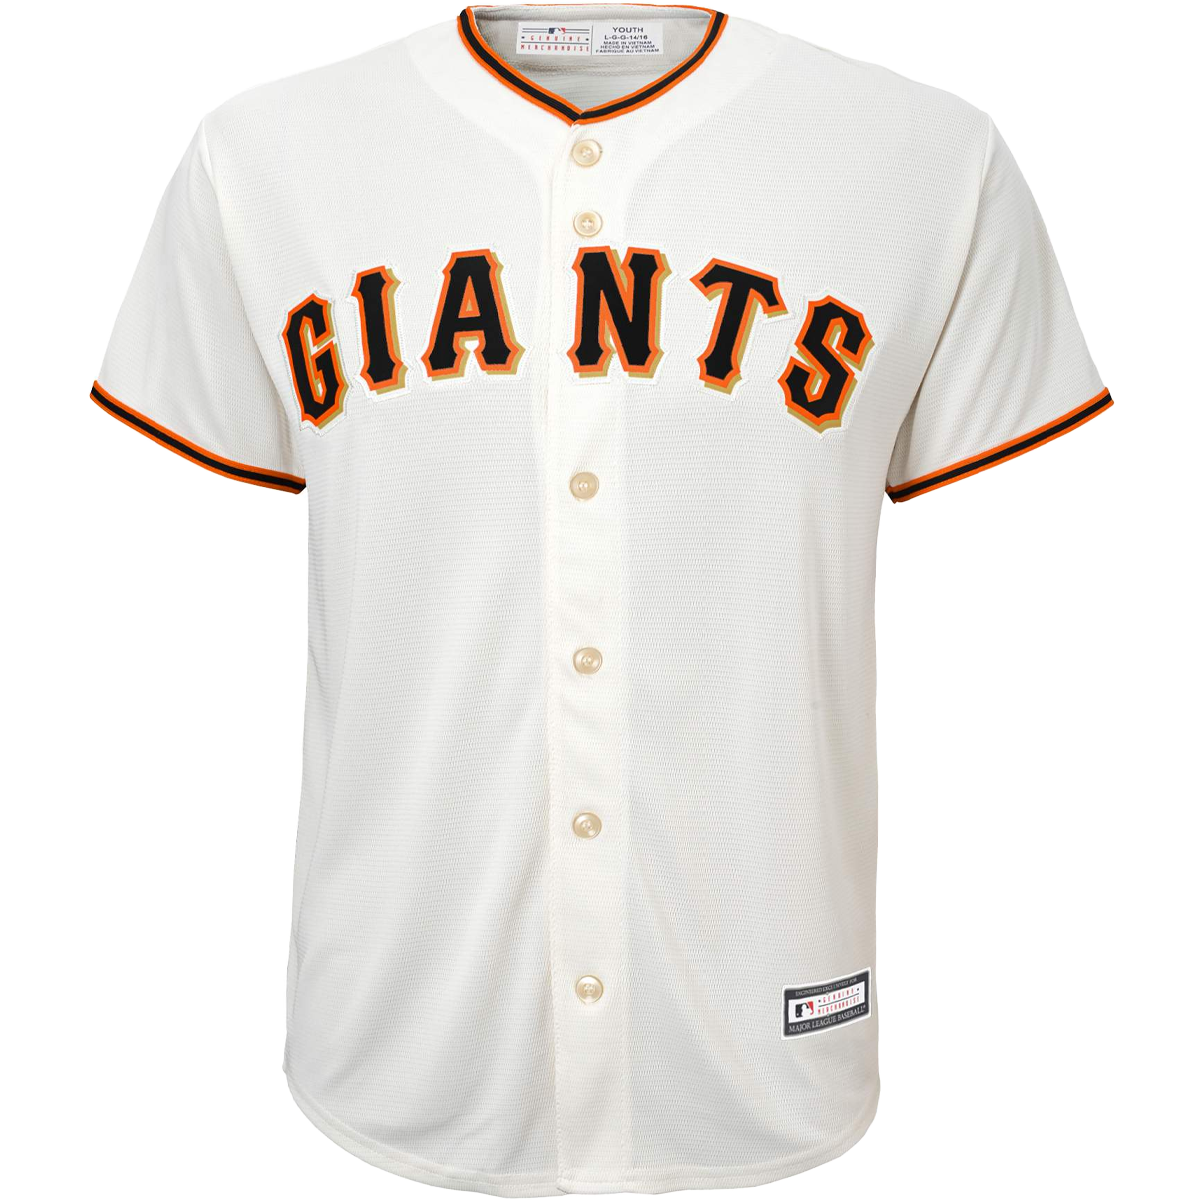 Outerstuff Ltd Youth Giants Sanitized Home Jersey | White | M Sports Basement